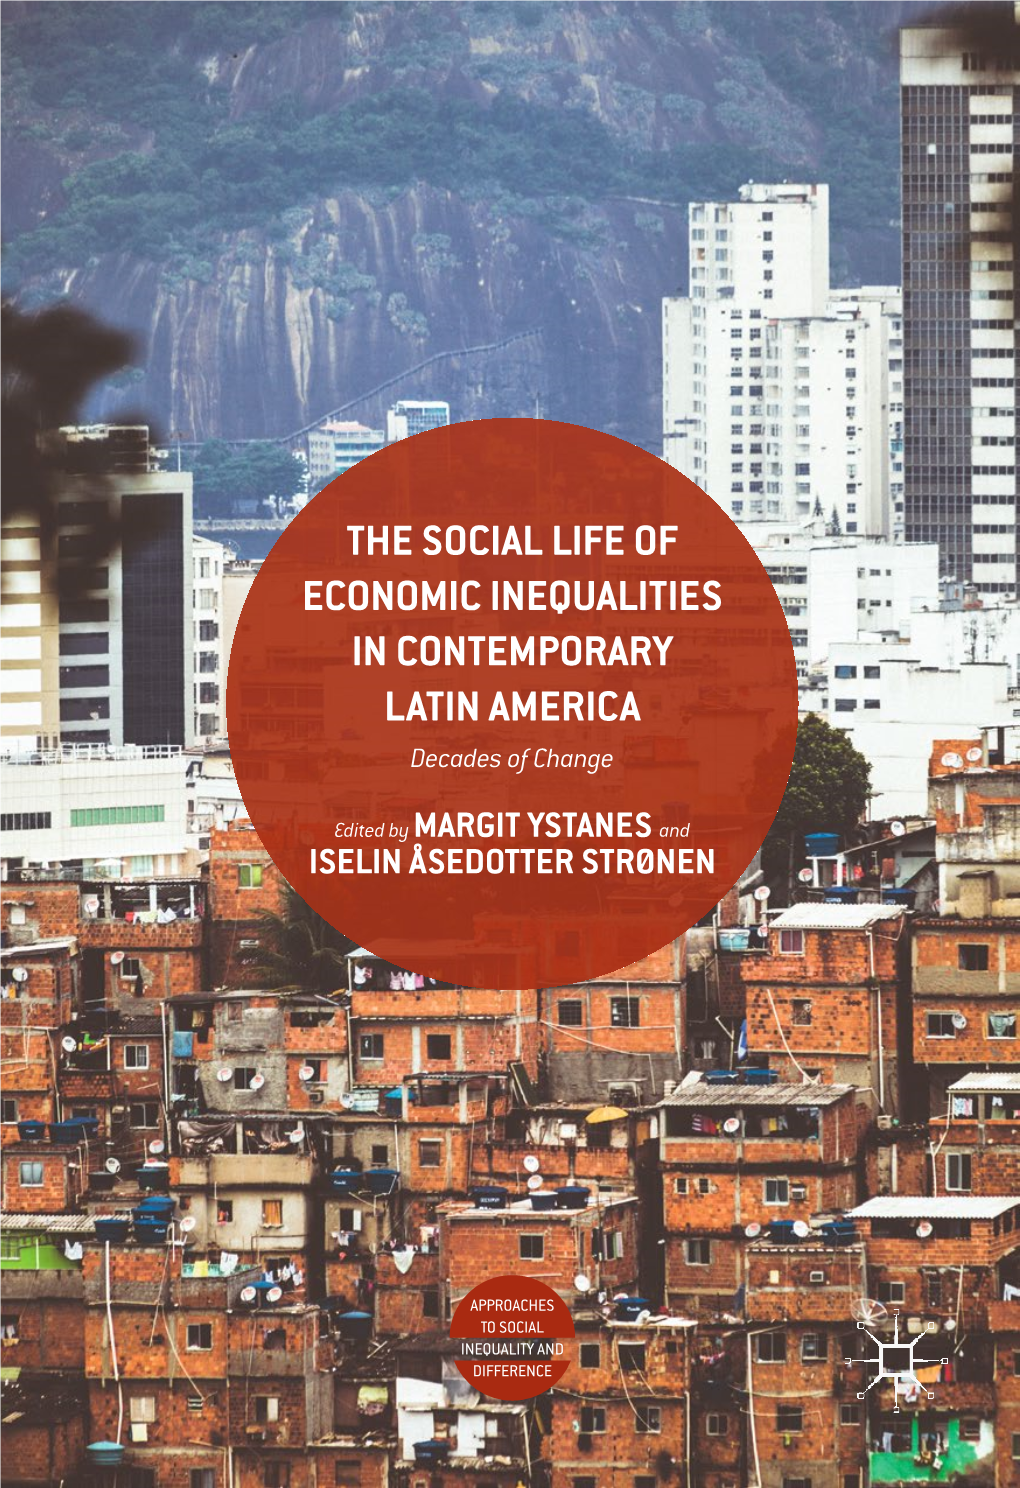 THE SOCIAL LIFE of ECONOMIC INEQUALITIES in CONTEMPORARY LATIN AMERICA Decades of Change